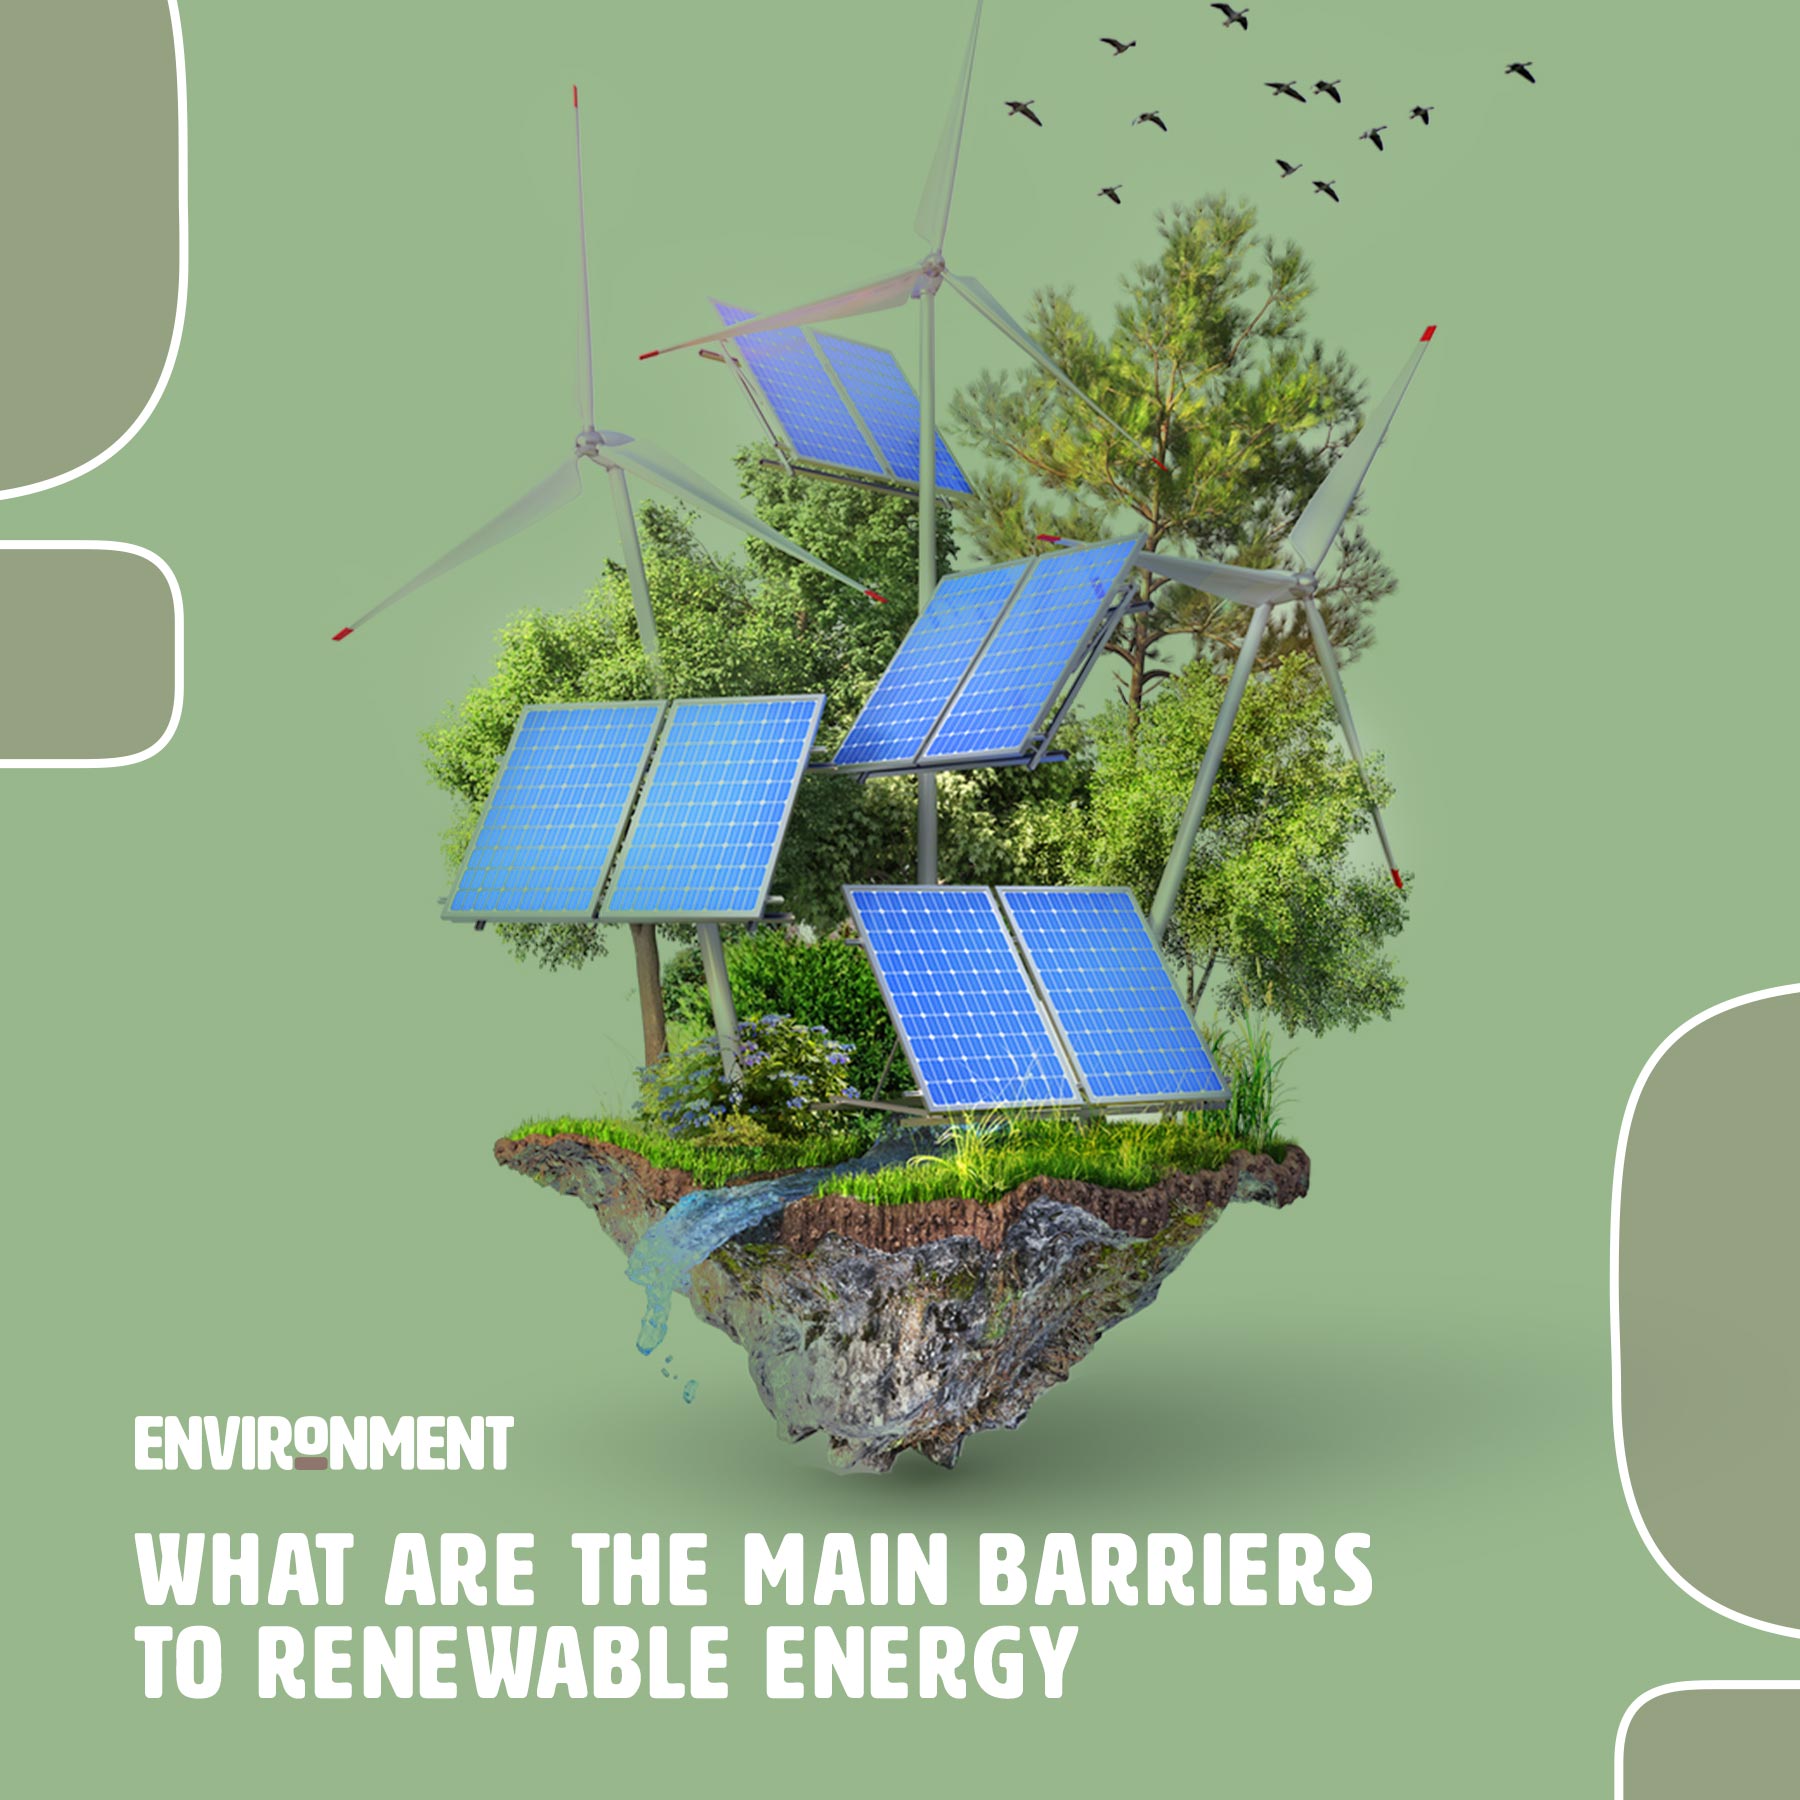 The substantial growth of renewable sources